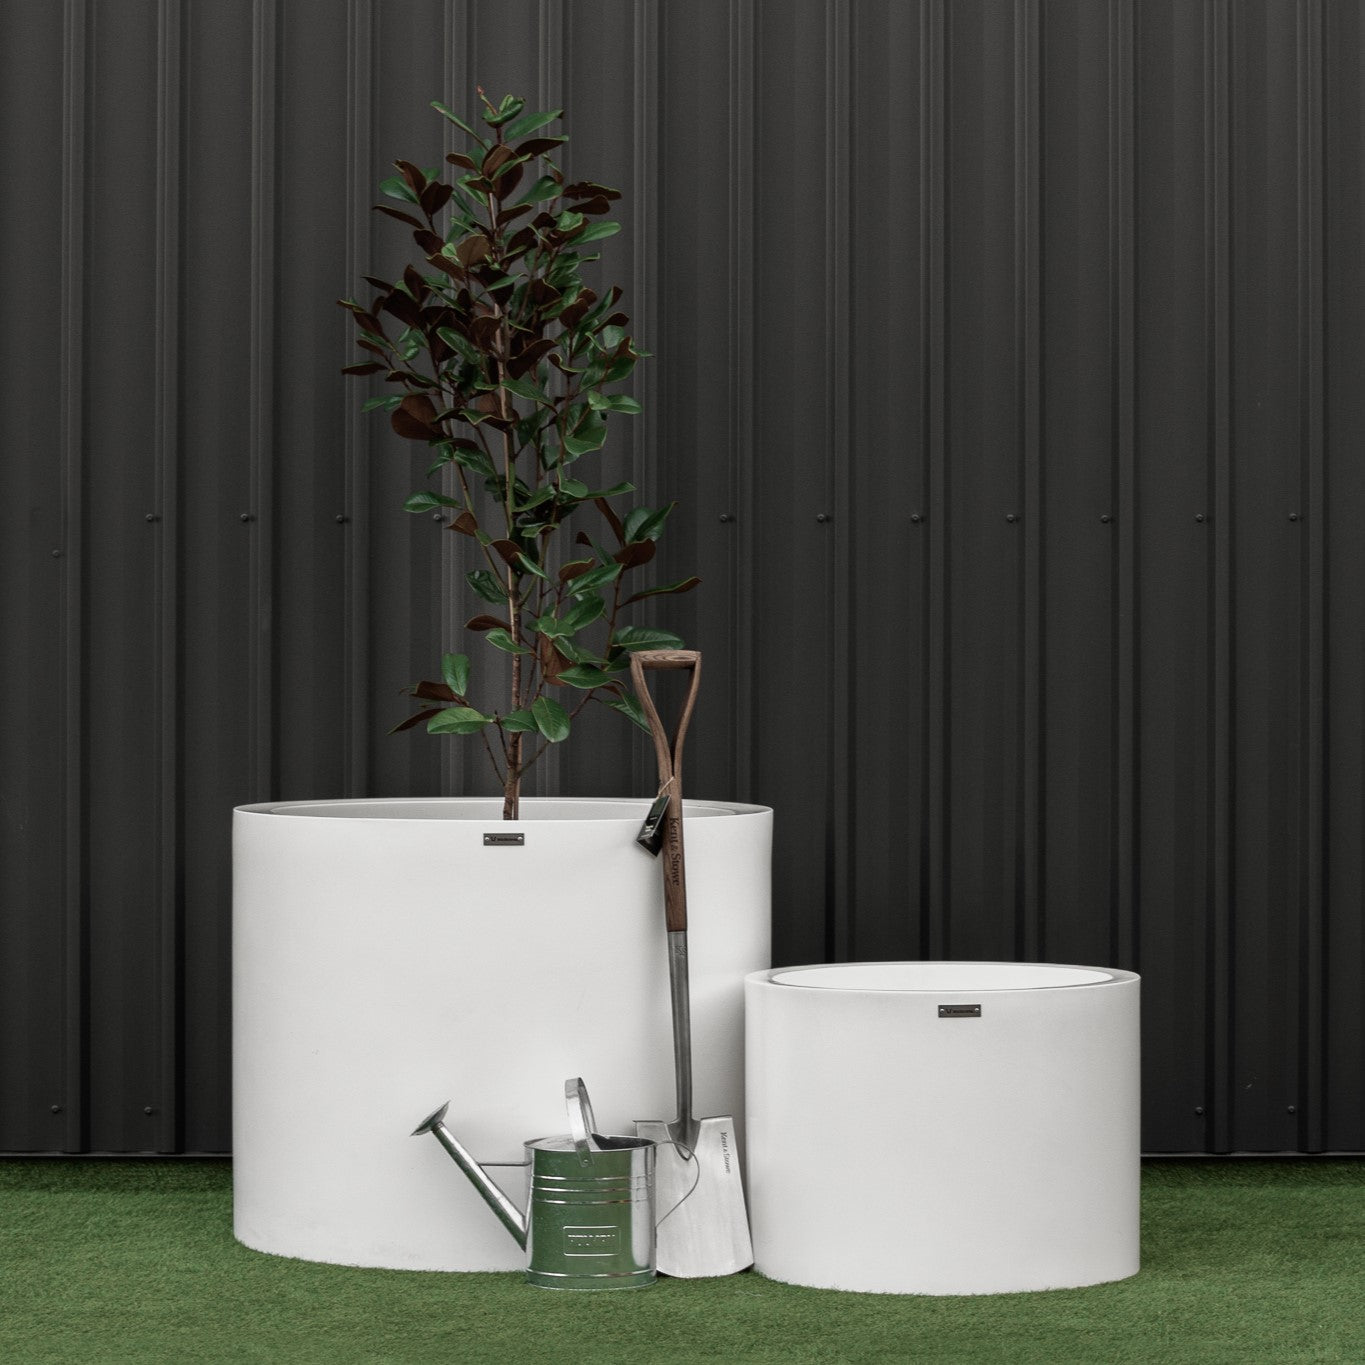 Large Modscene cylinder planters in front of a black wall.